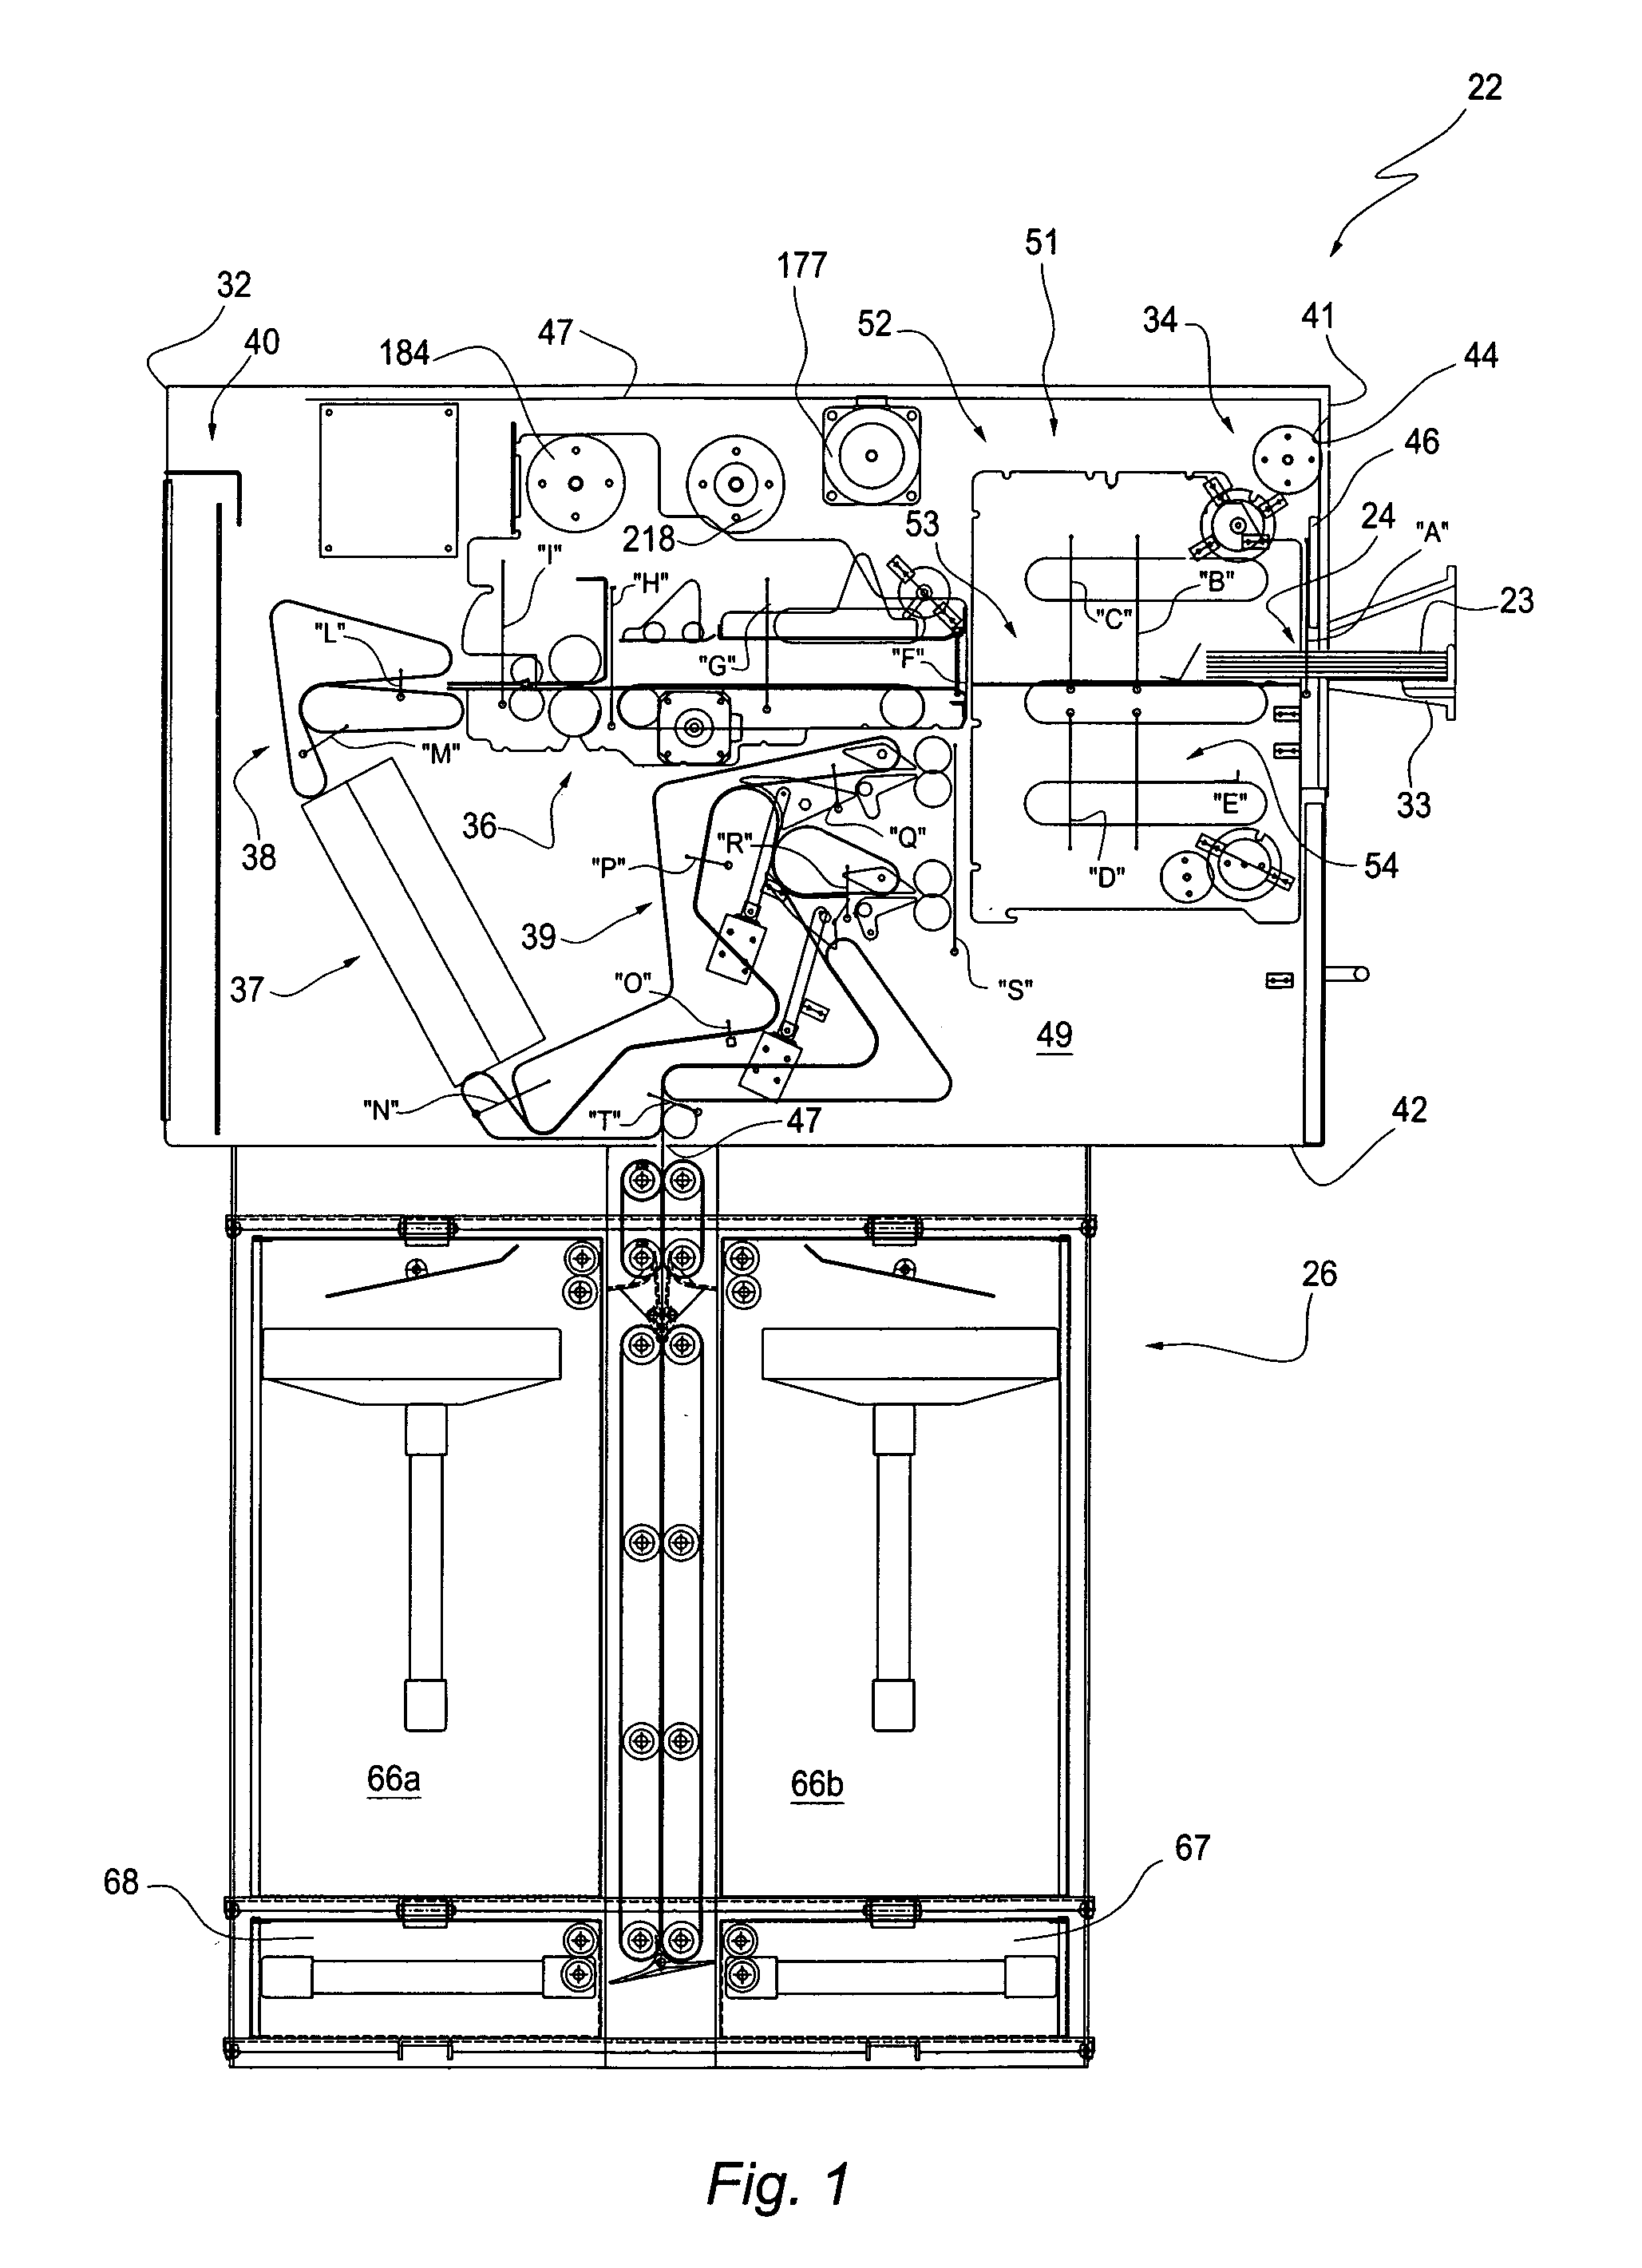 Equipment for the automatic deposit of banknotes